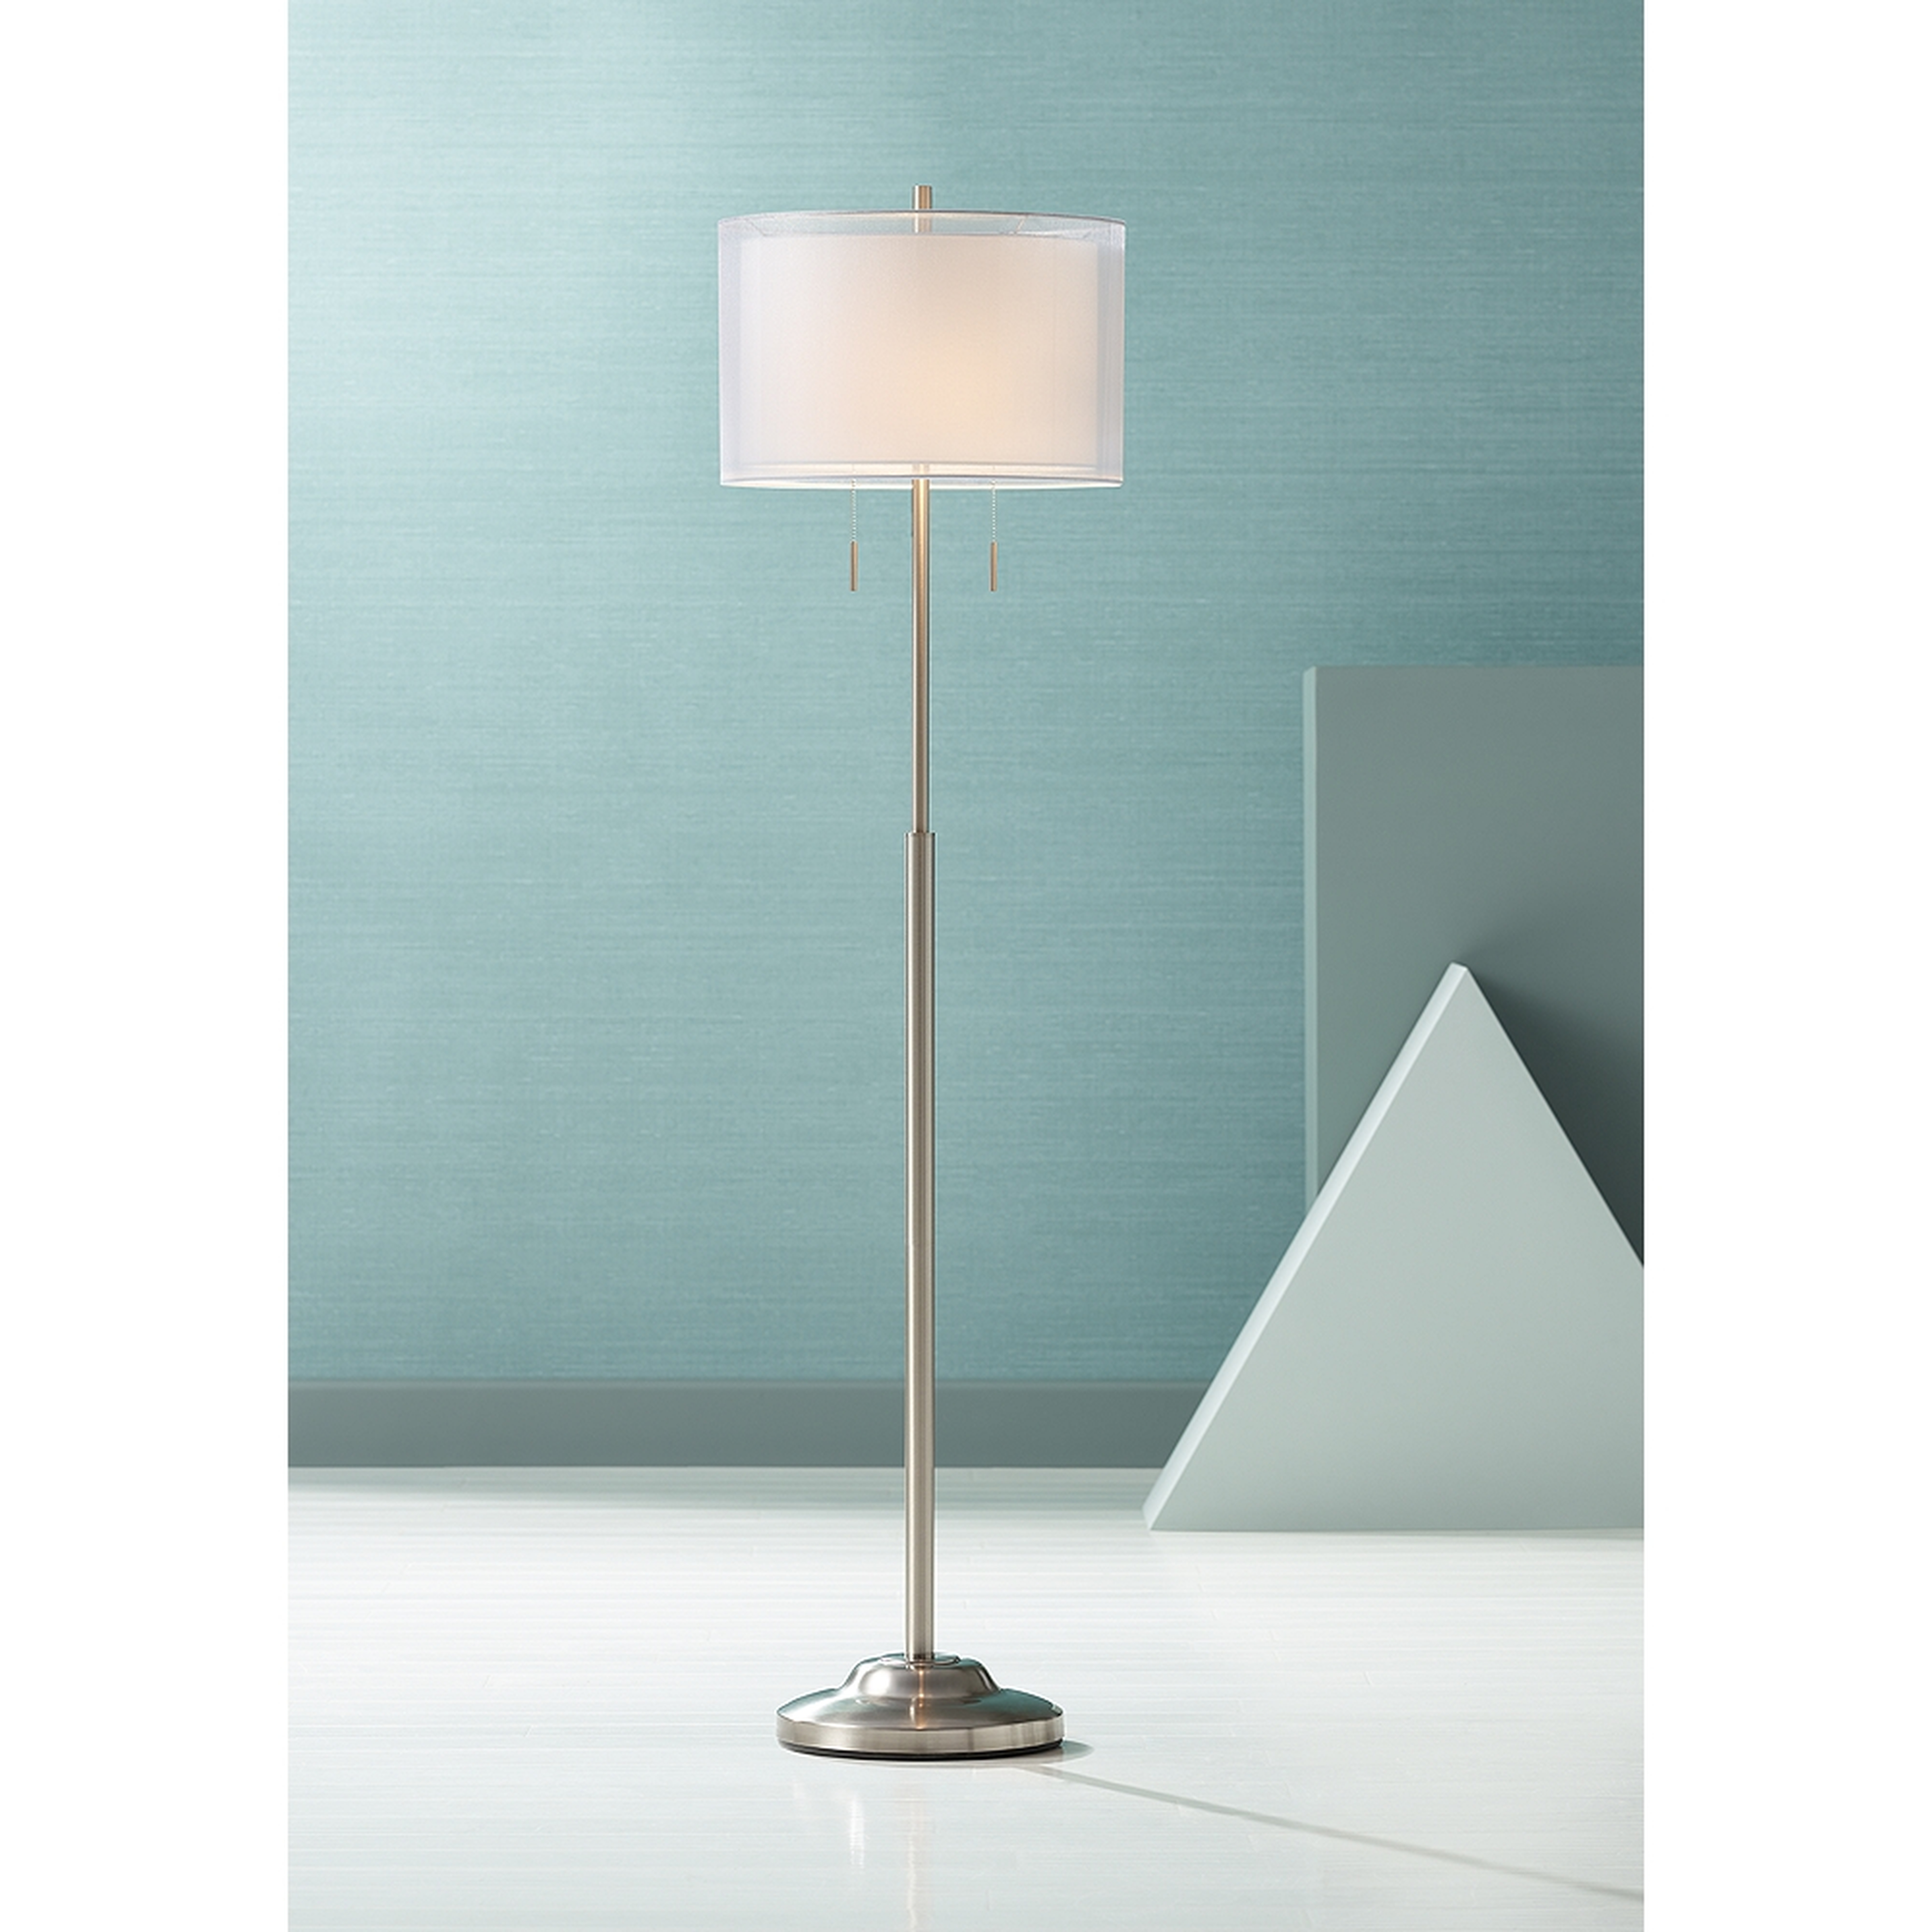 Roxie Brushed Steel Floor Lamp with Double Shade - Style # 7J459 - Lamps Plus